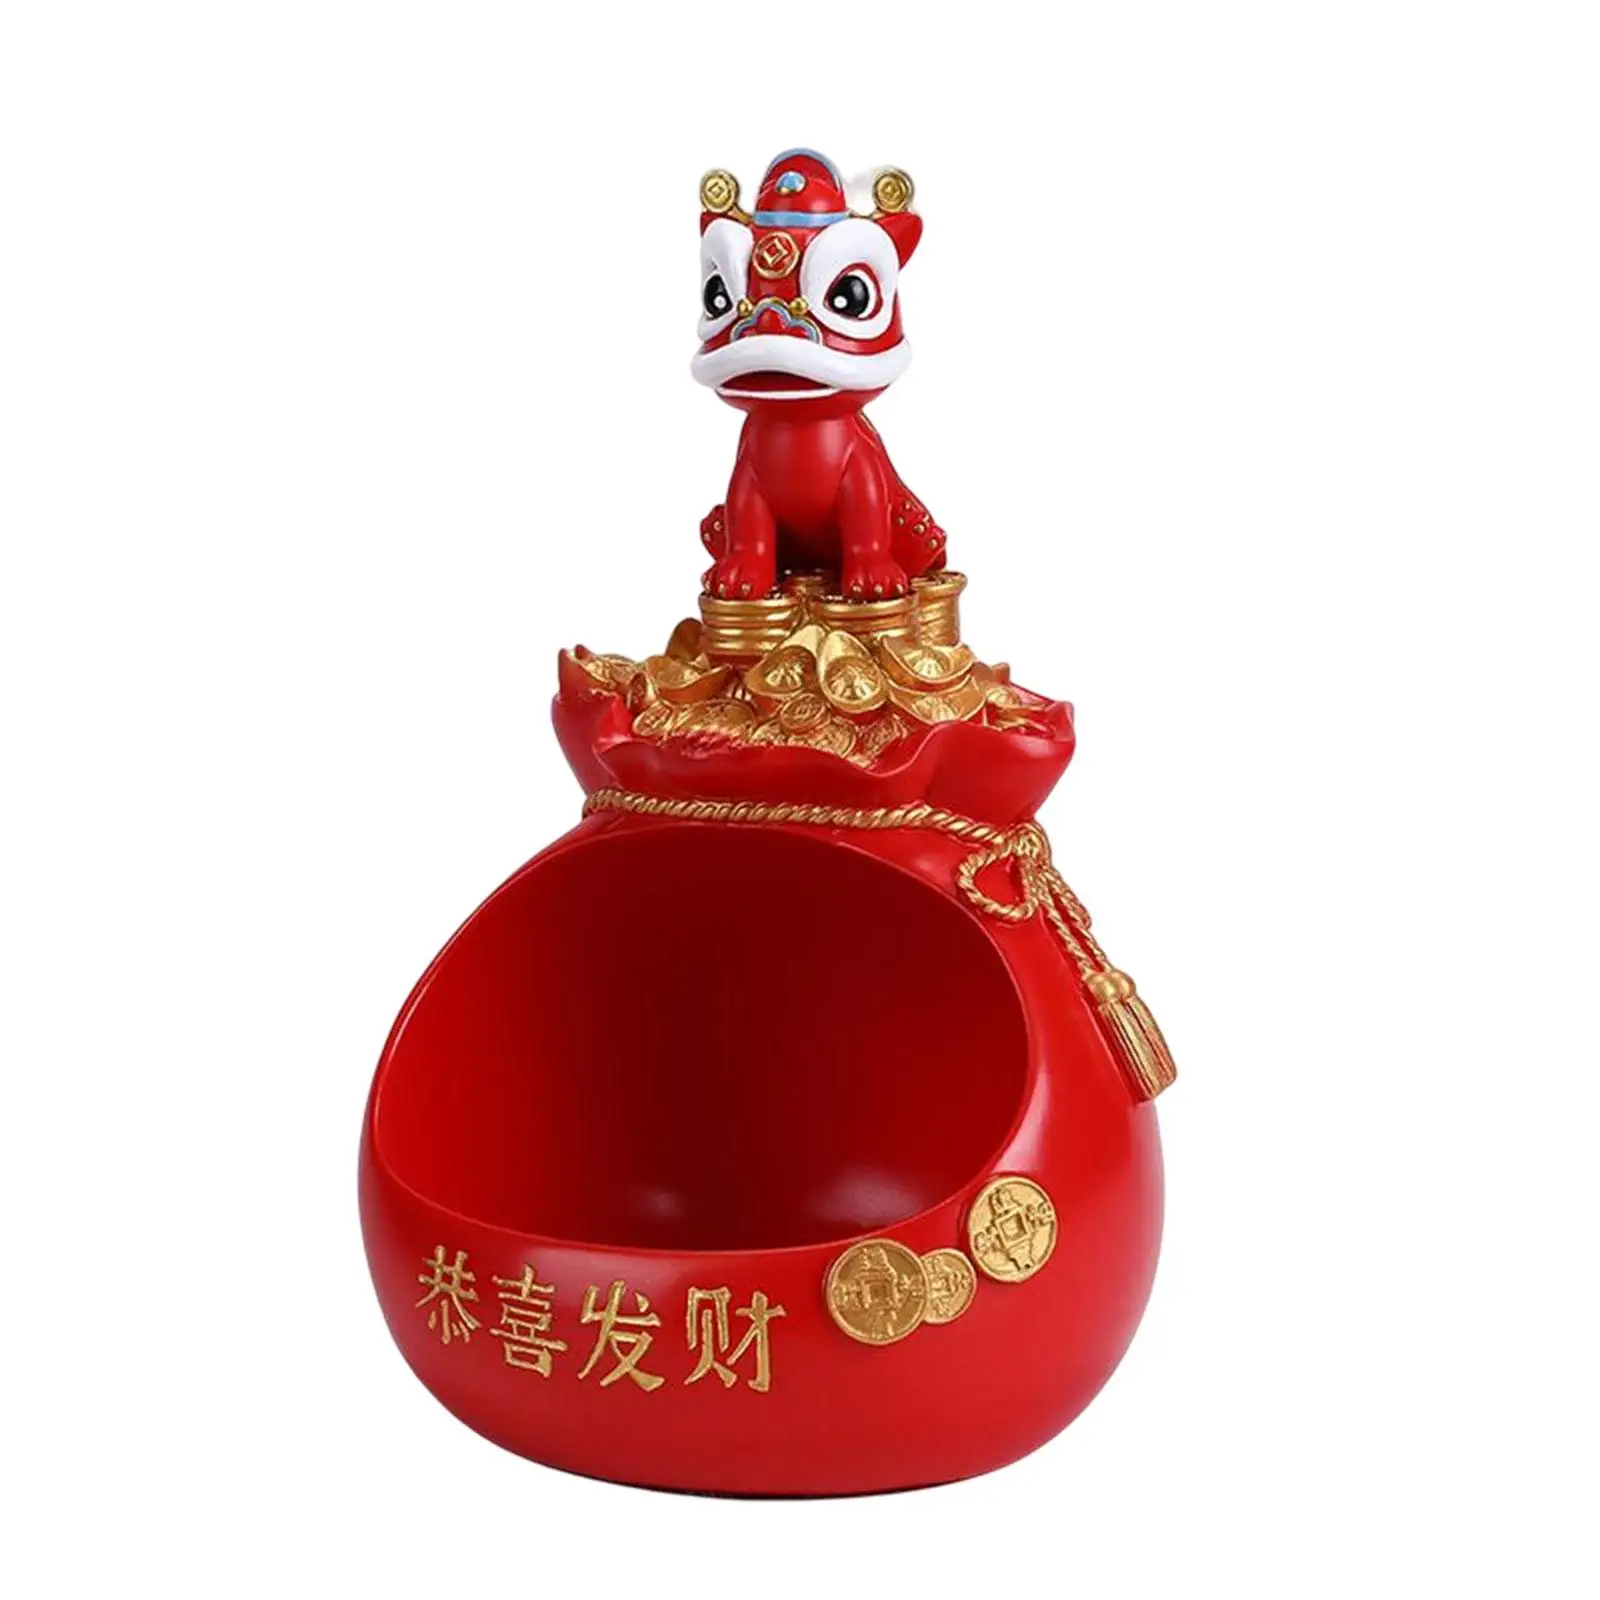 Chinese Statue Ornament Desk Sundries Container Figurine Table Art Decoration Sculpture for Office Living Room Home Decoration